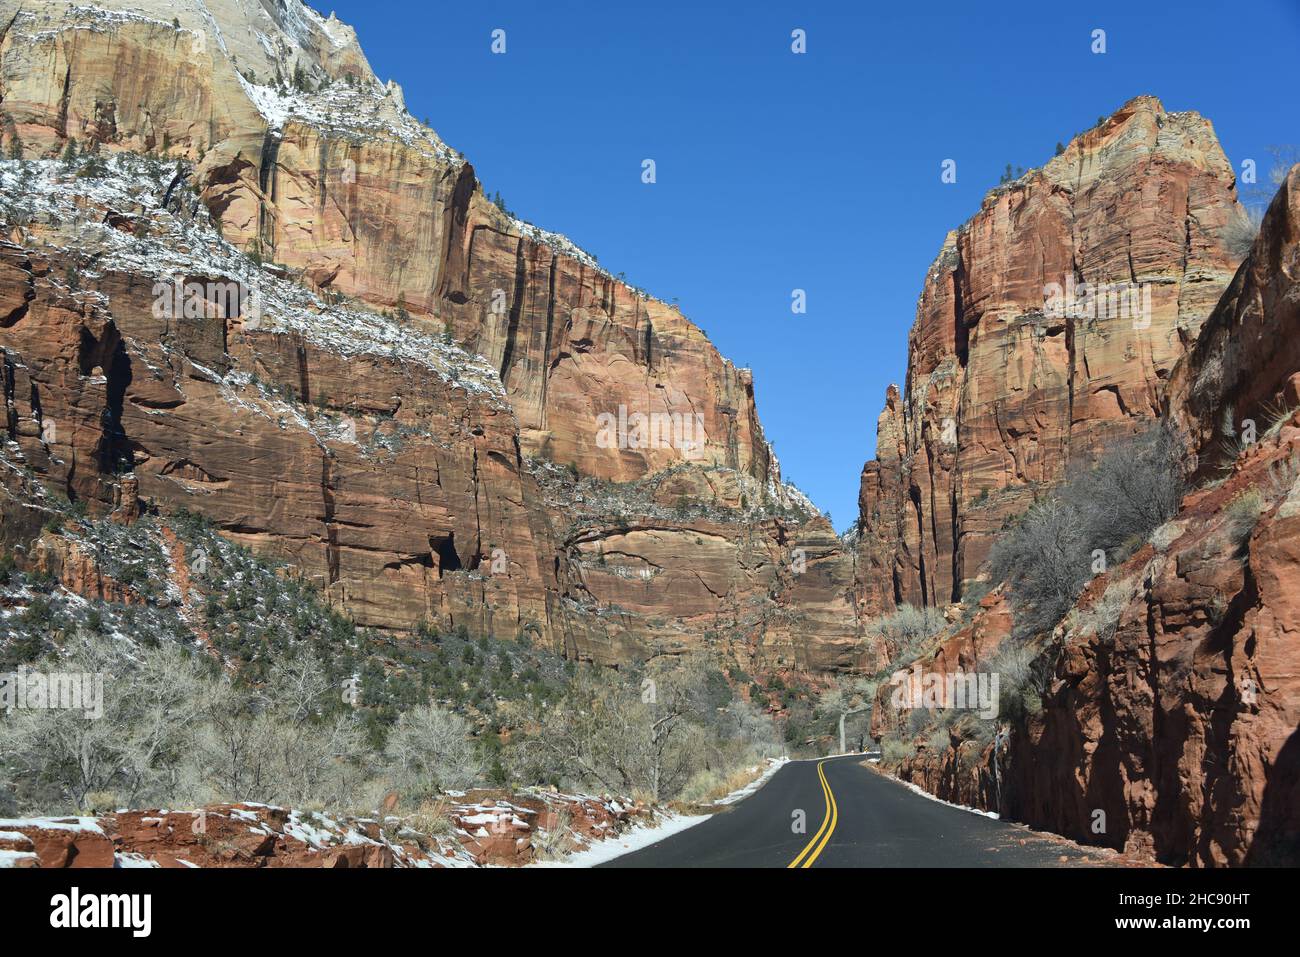 Large format panoramic landscape of the snow dusted colorful cliffs surrounding the road through Zion National Park, Utah, USA. Stock Photo